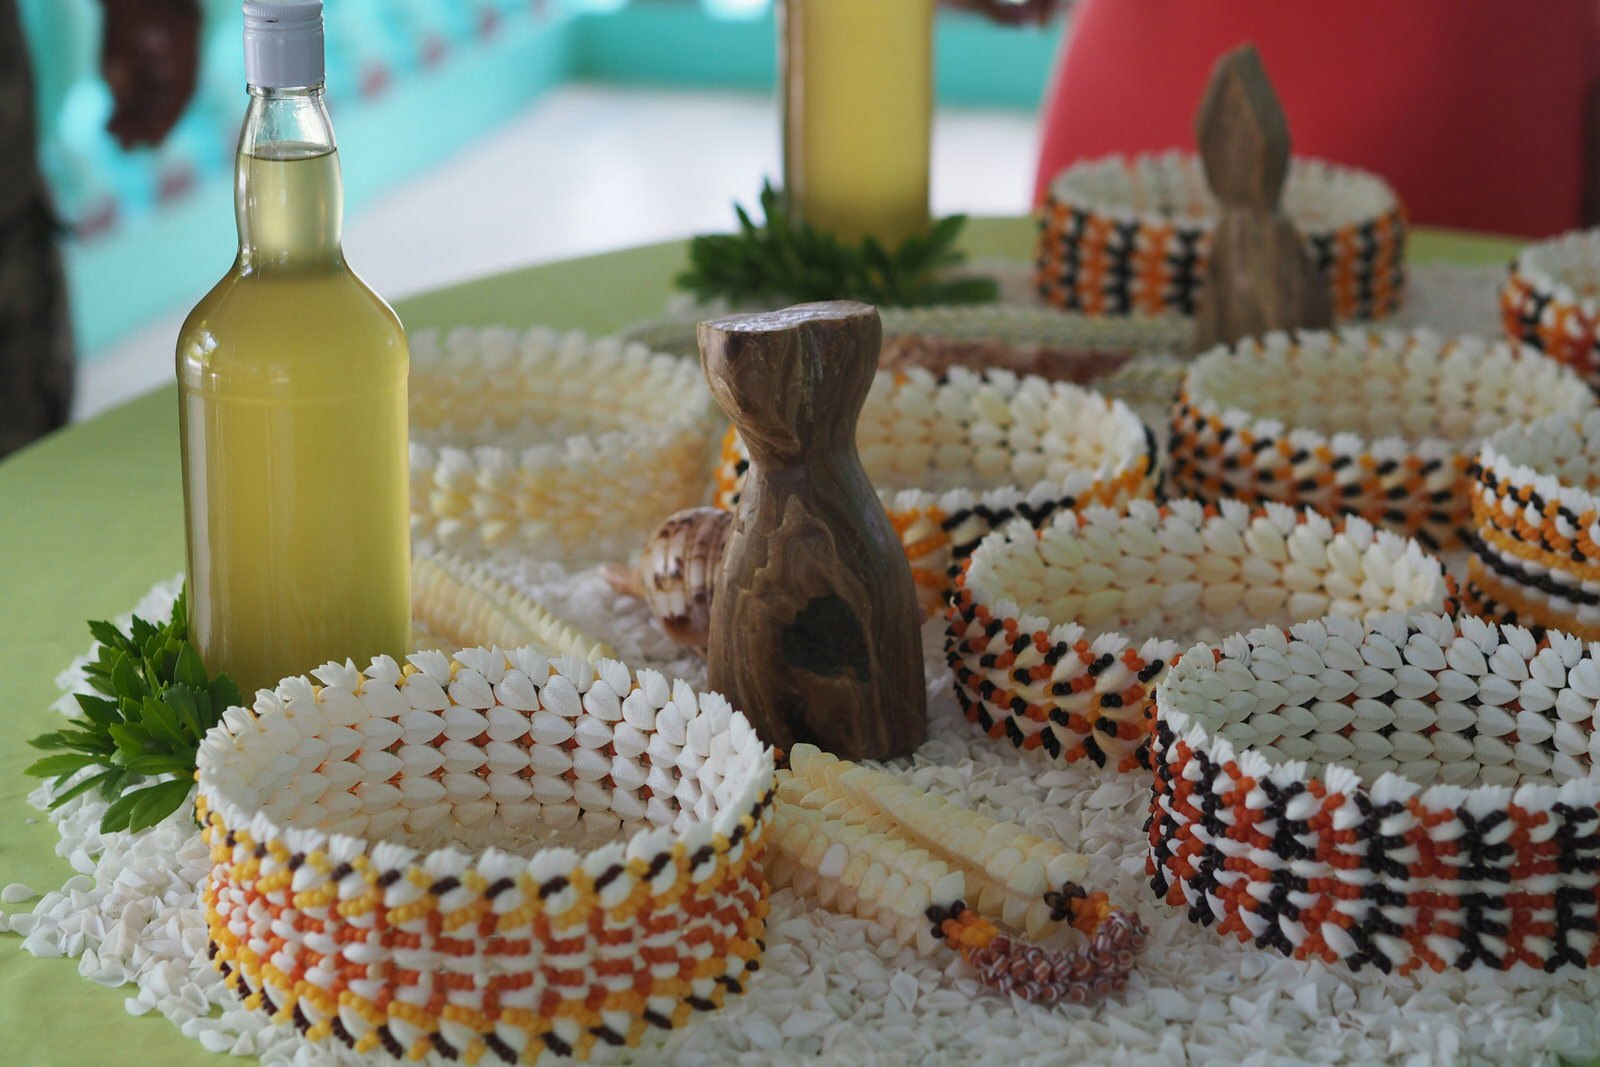 Several bracelets crafted from white and coloured shells from Anaa displayed on a table.